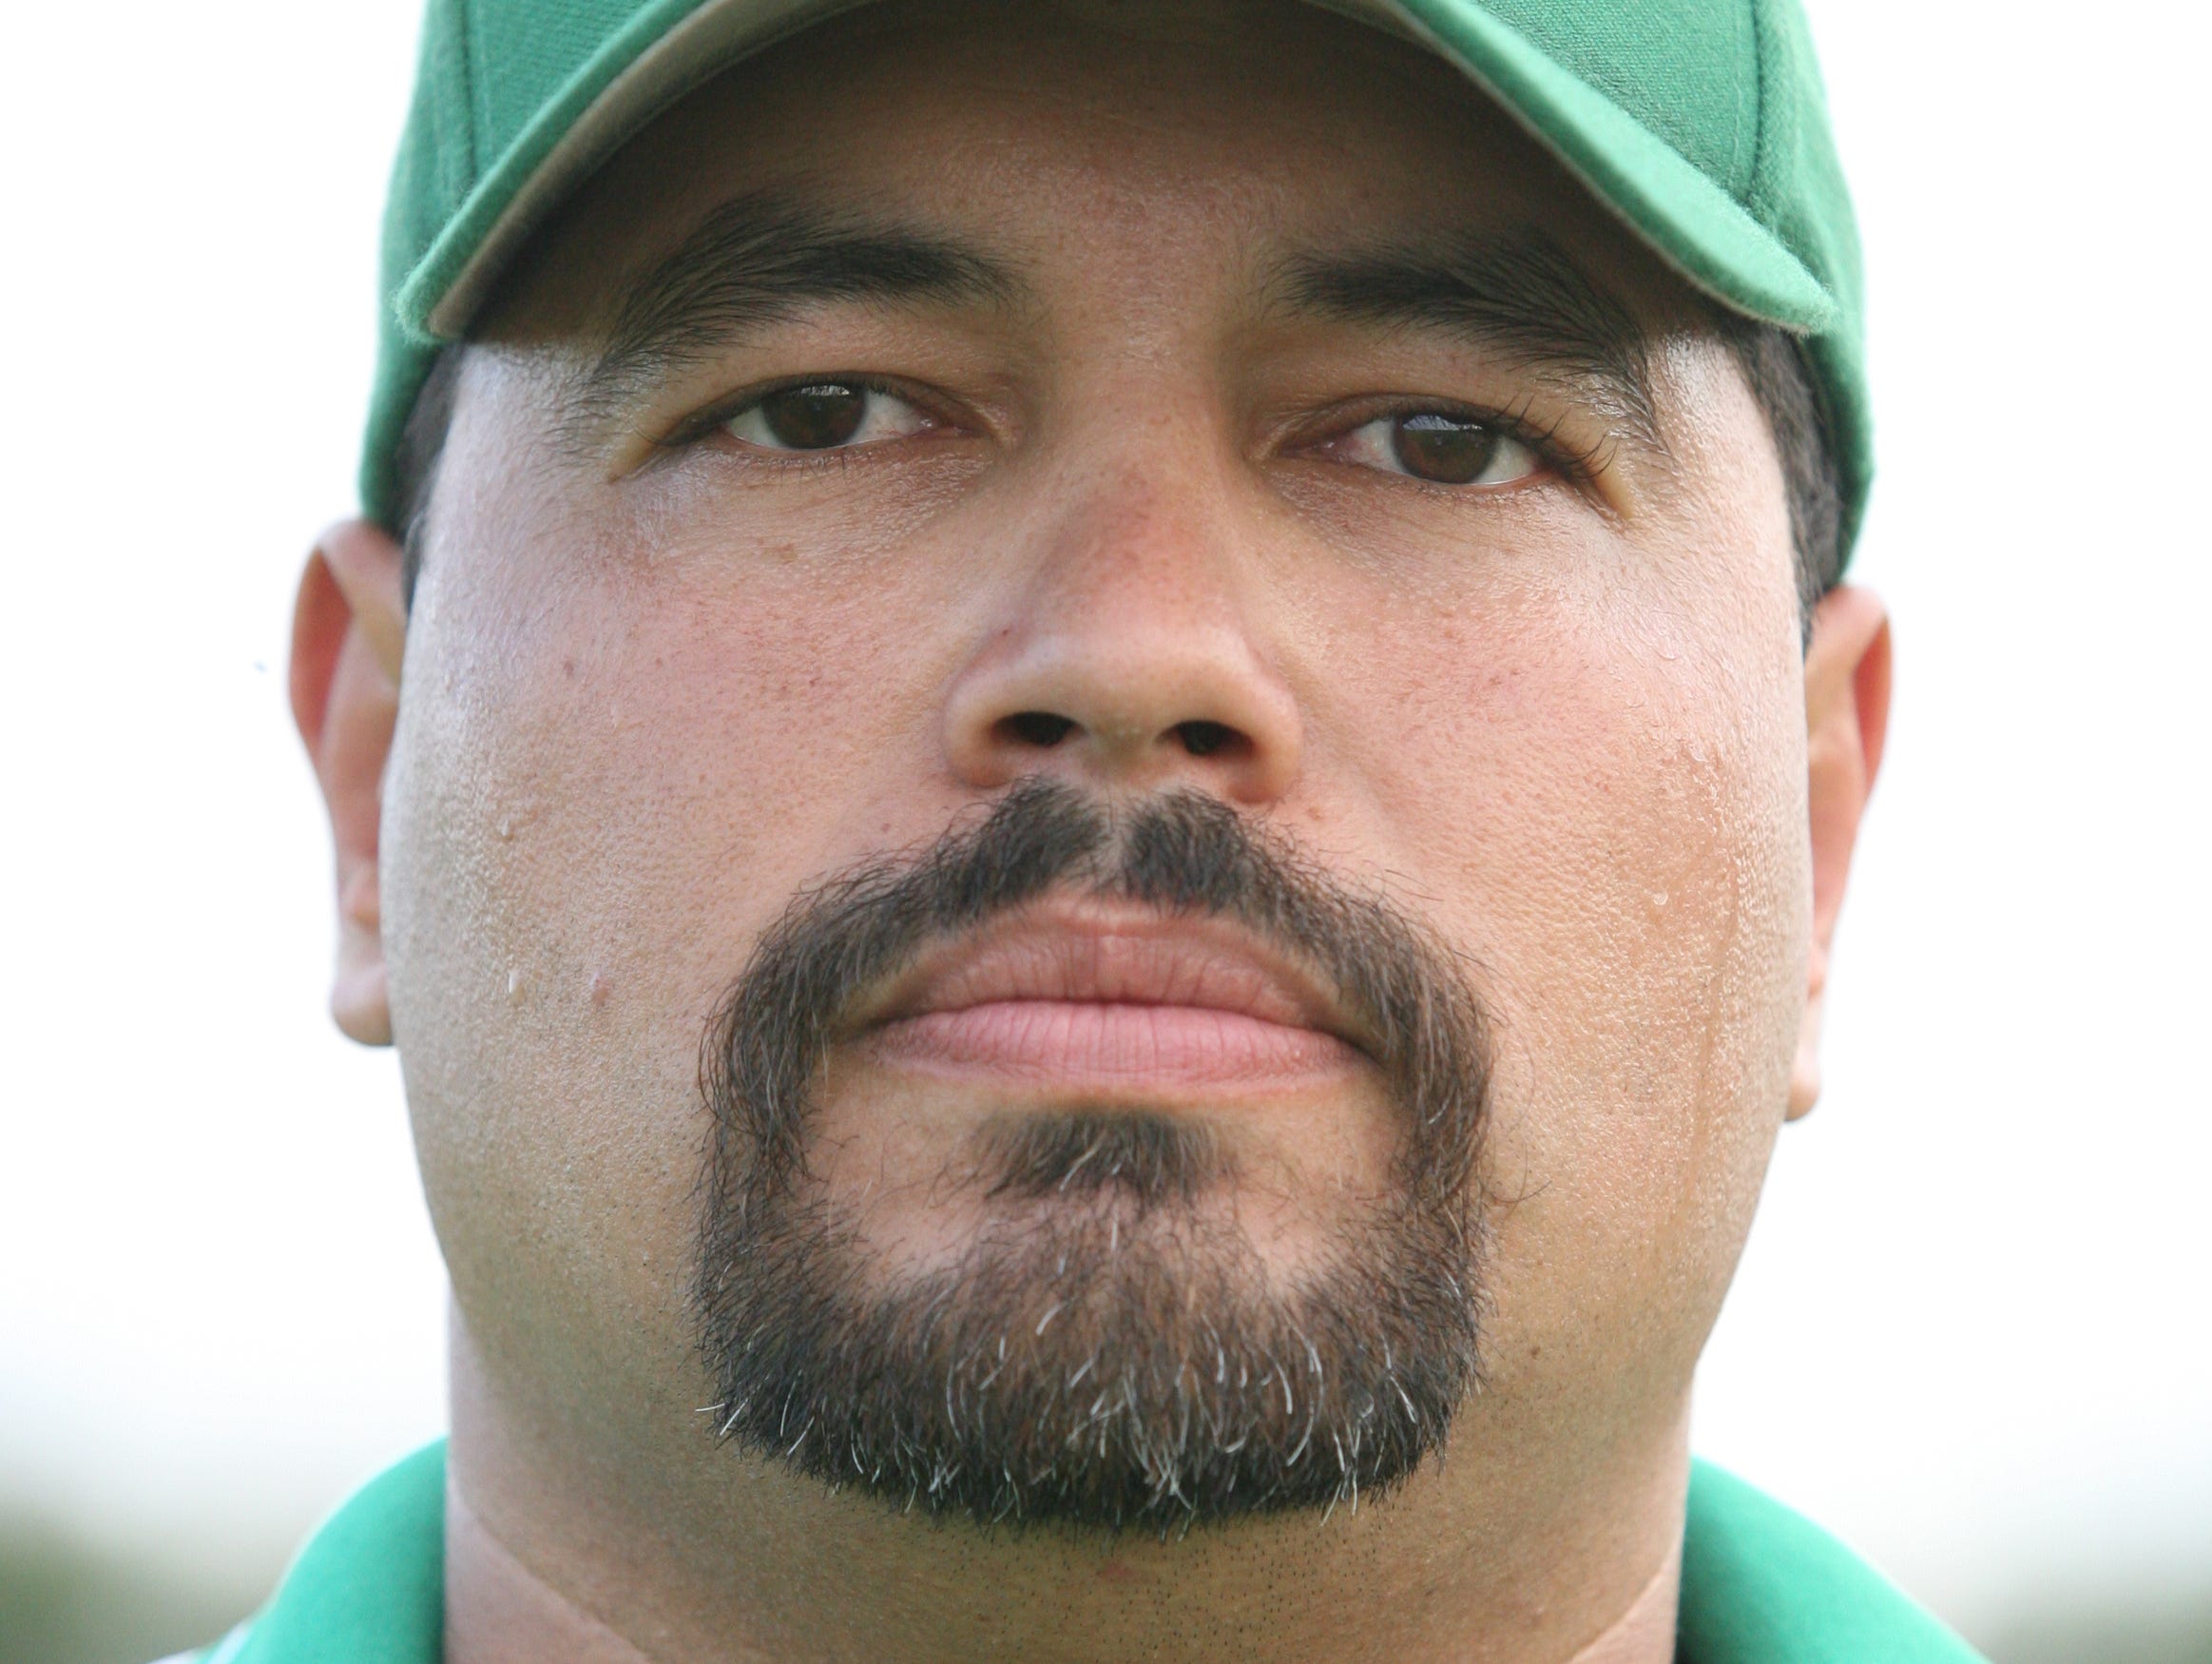 Juan Ramon Ruiz, who coached football for four years at Coachella Valley, two seasons at Desert Mirage, and the previous four at La Quinta is now the Blackhawks' new athletic director.